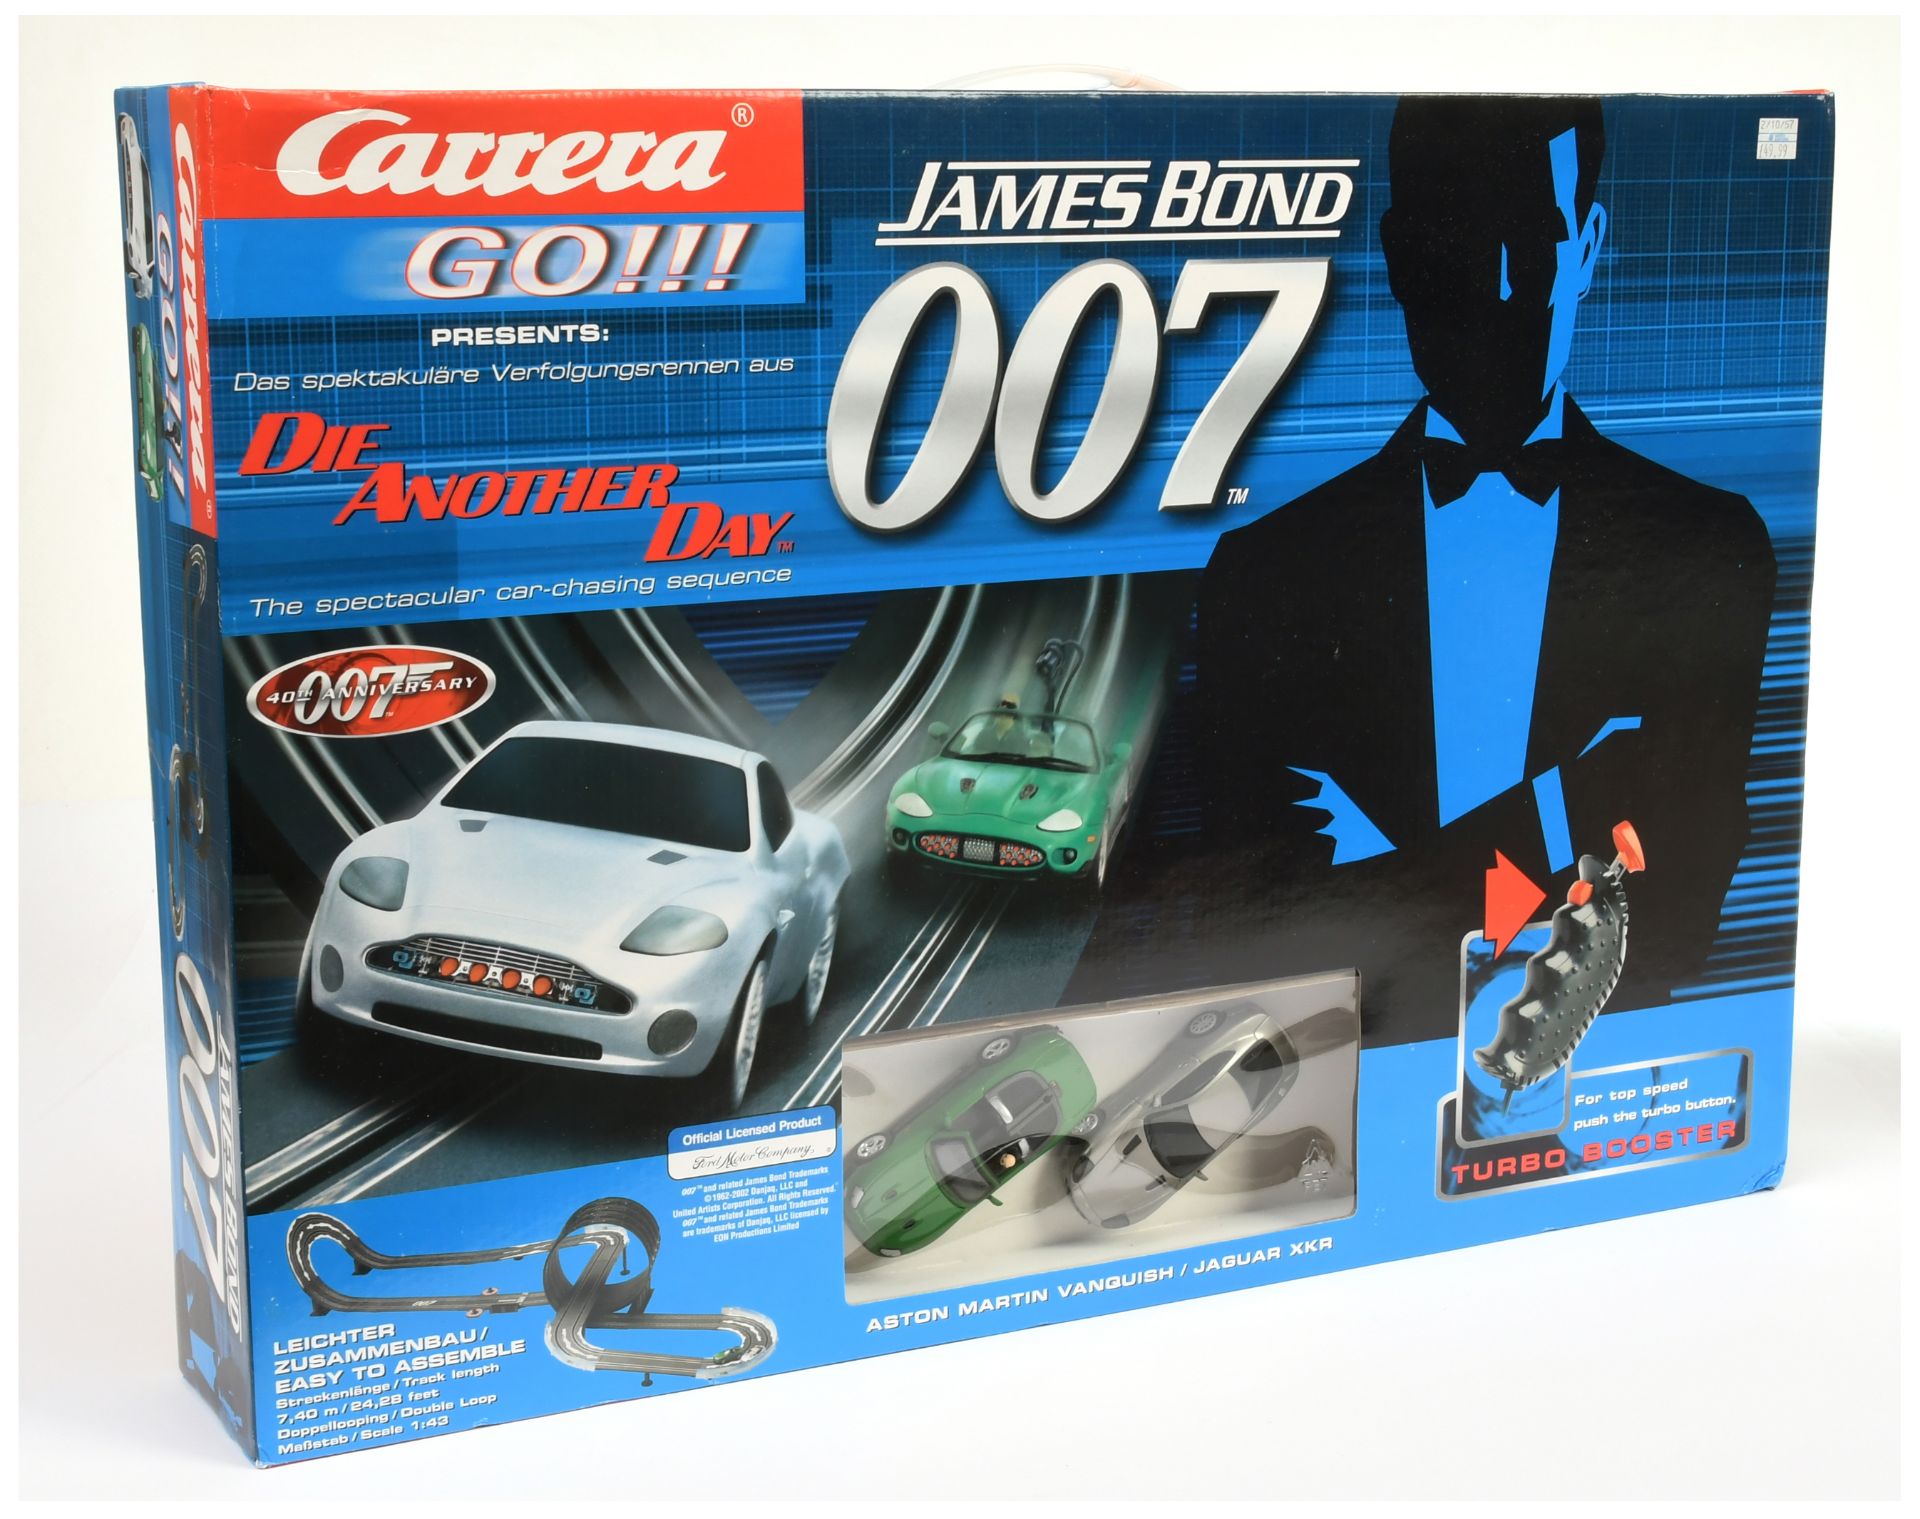 Carrera Go!!! James Bond 007 Die Another Day The Spectacular Car-Chasing Sequence slot car set, i...